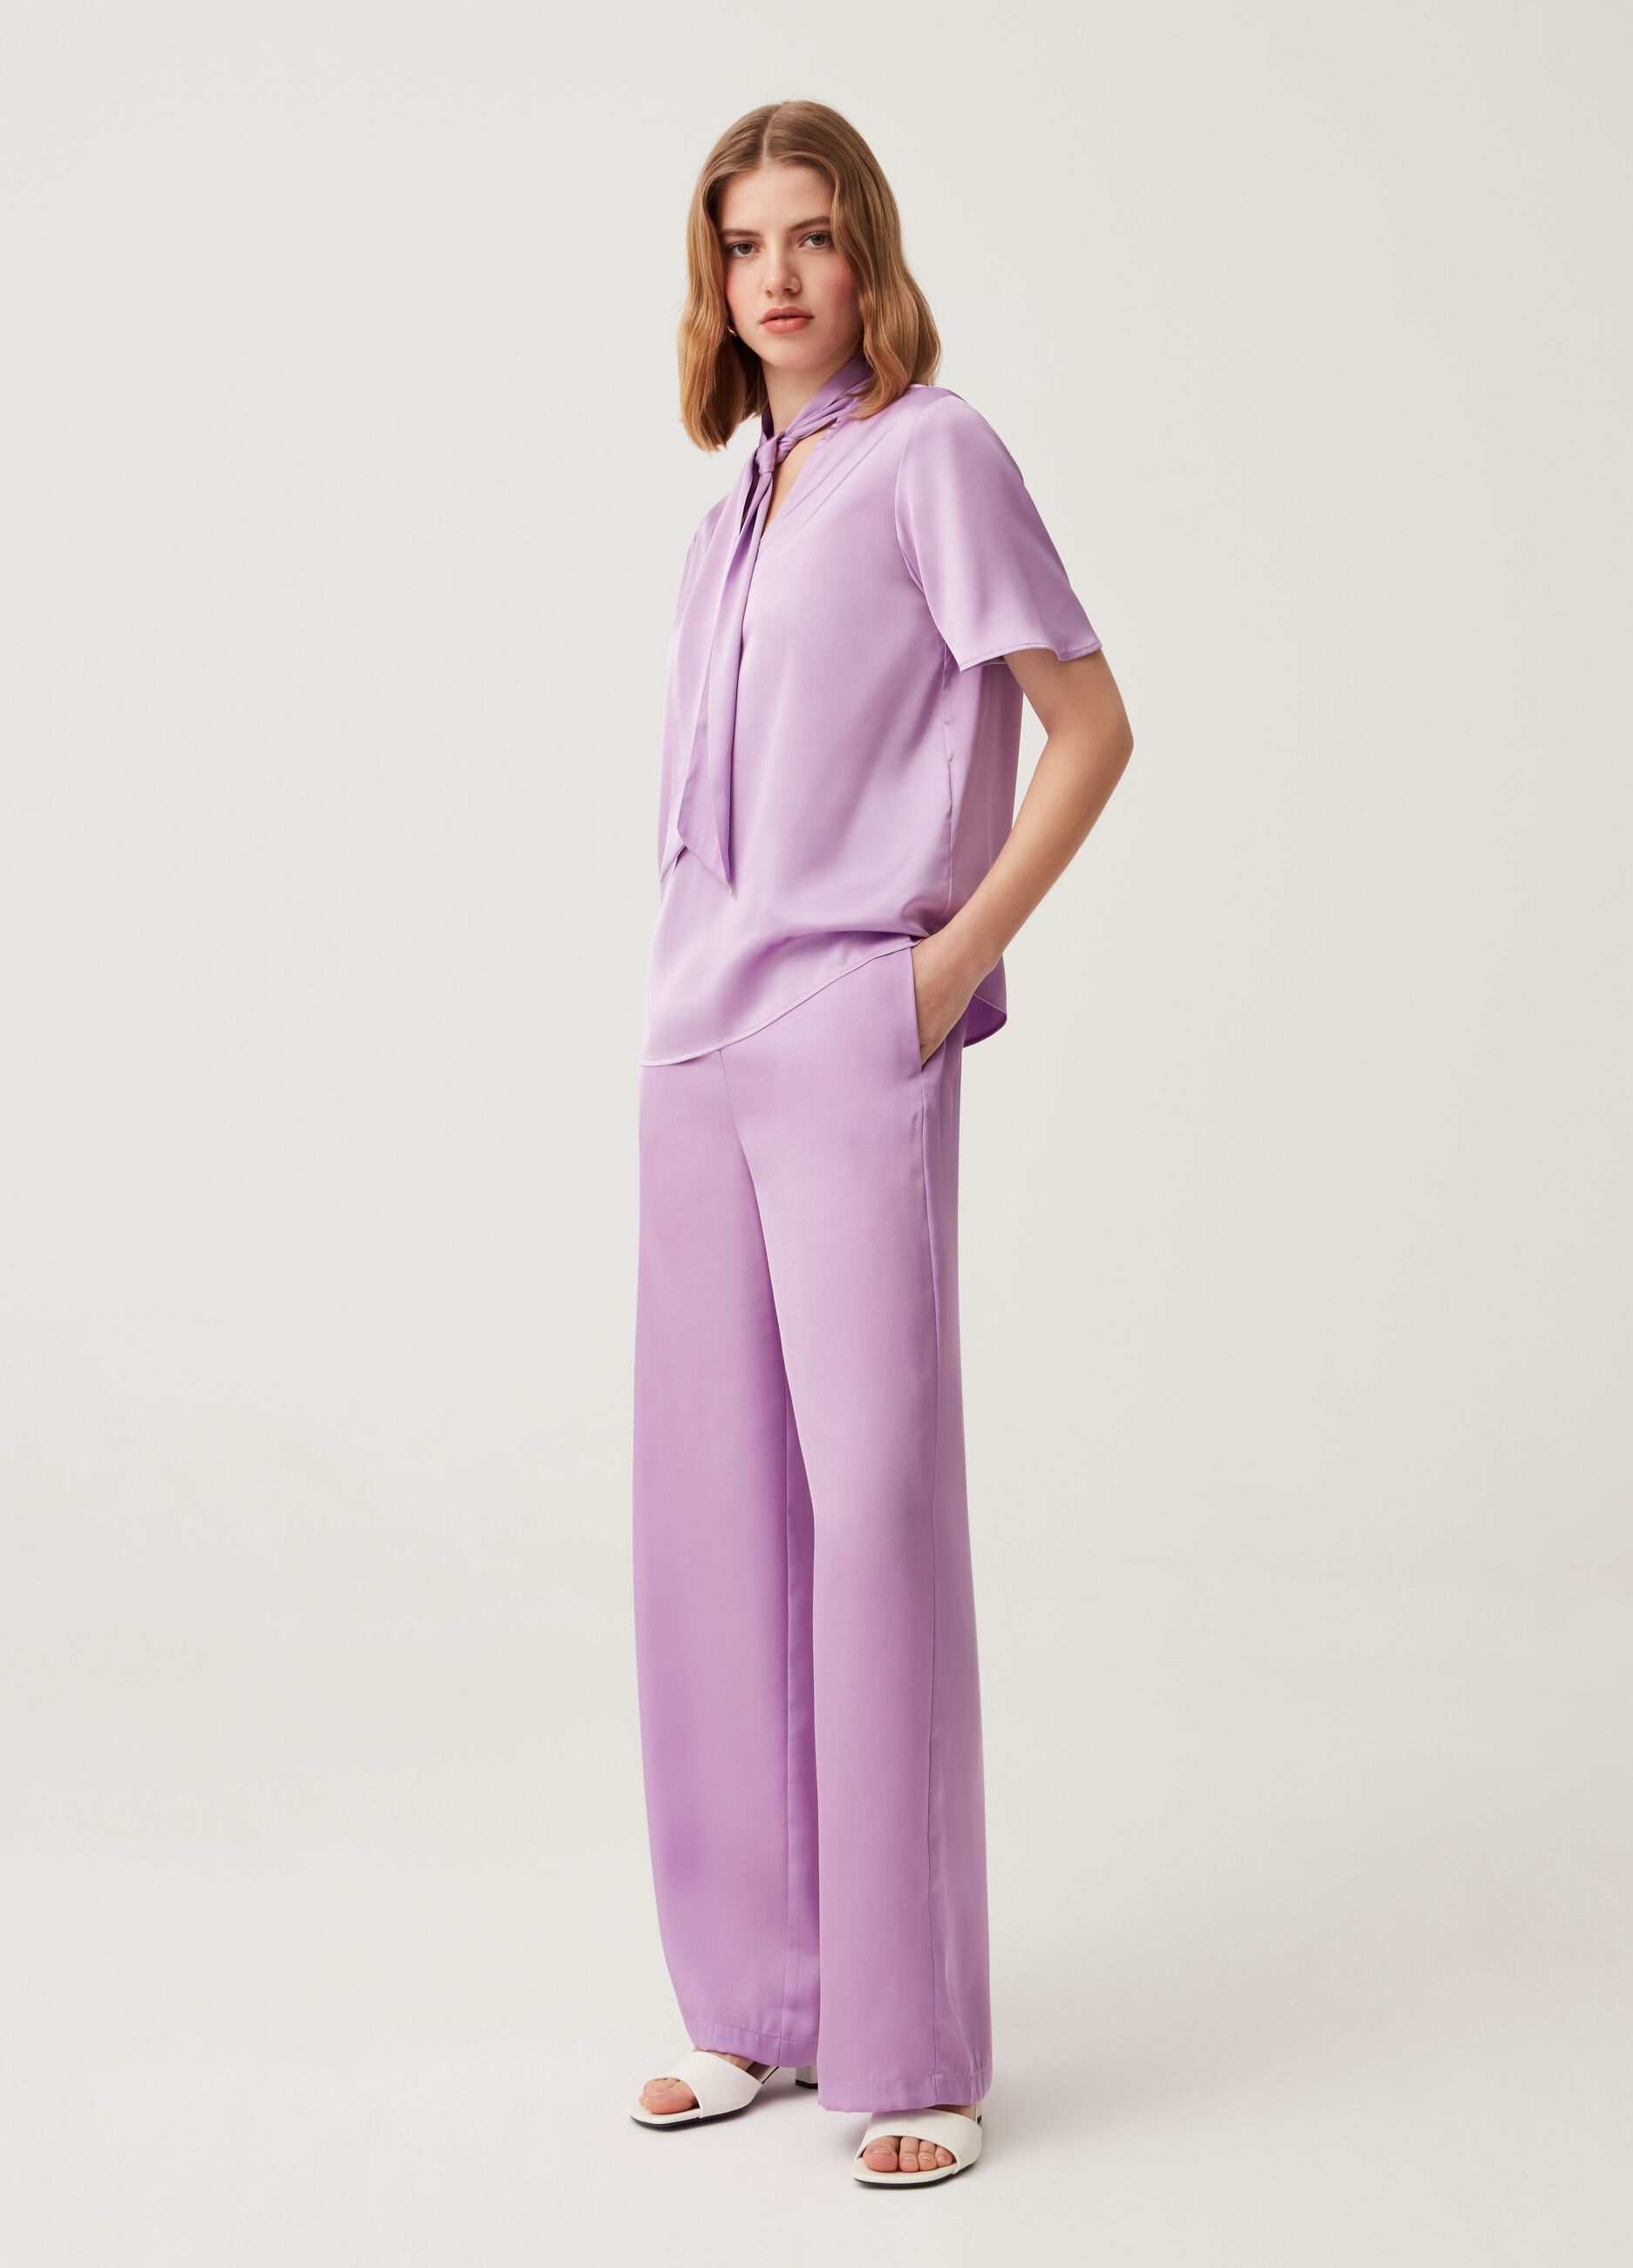 pants with fabric covered belt zara lilacTikTok Search